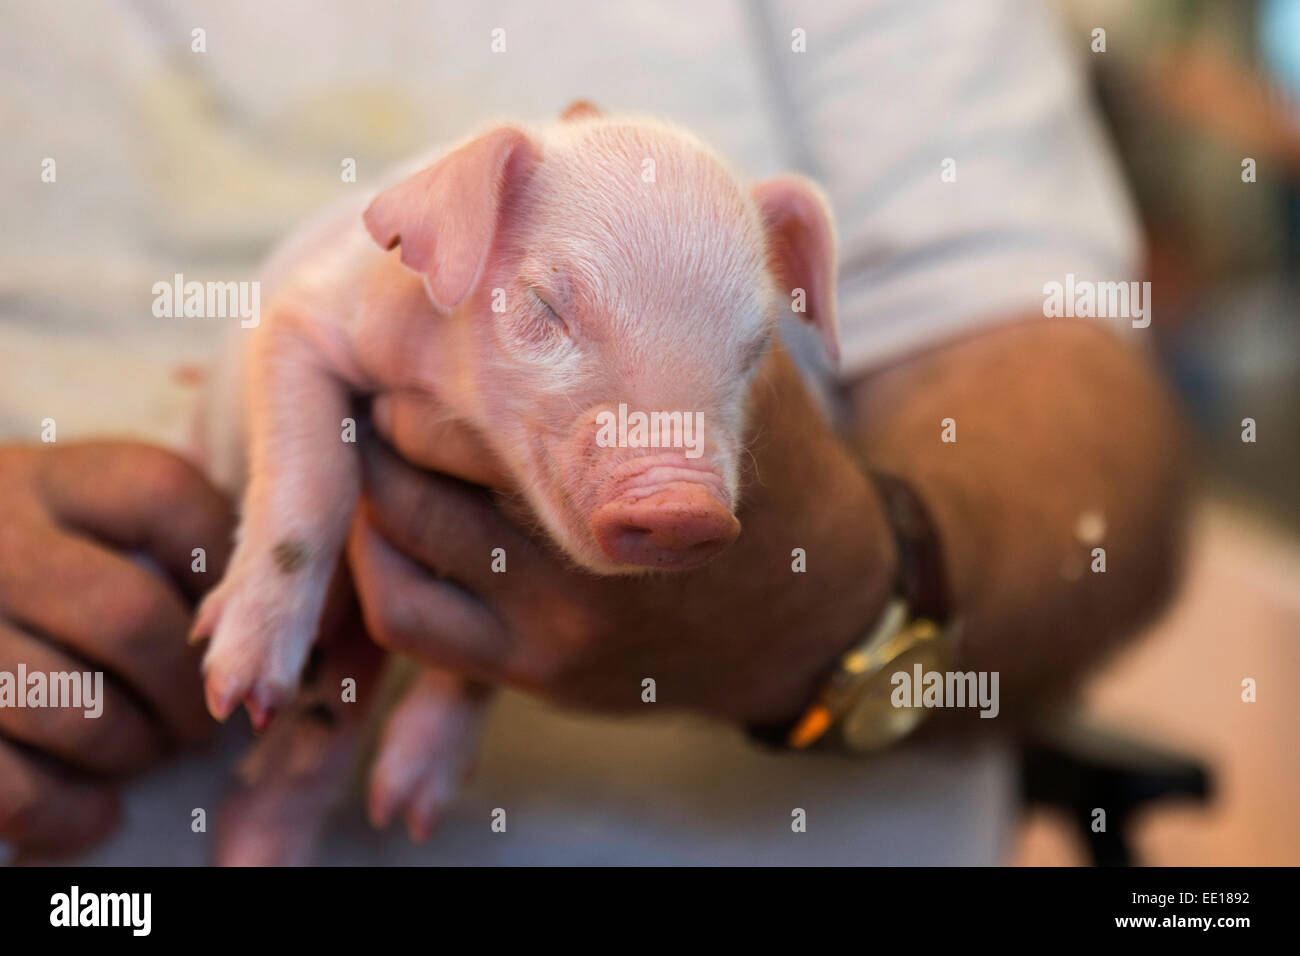 Three days old piglet in hands of a farmer Stock Photo